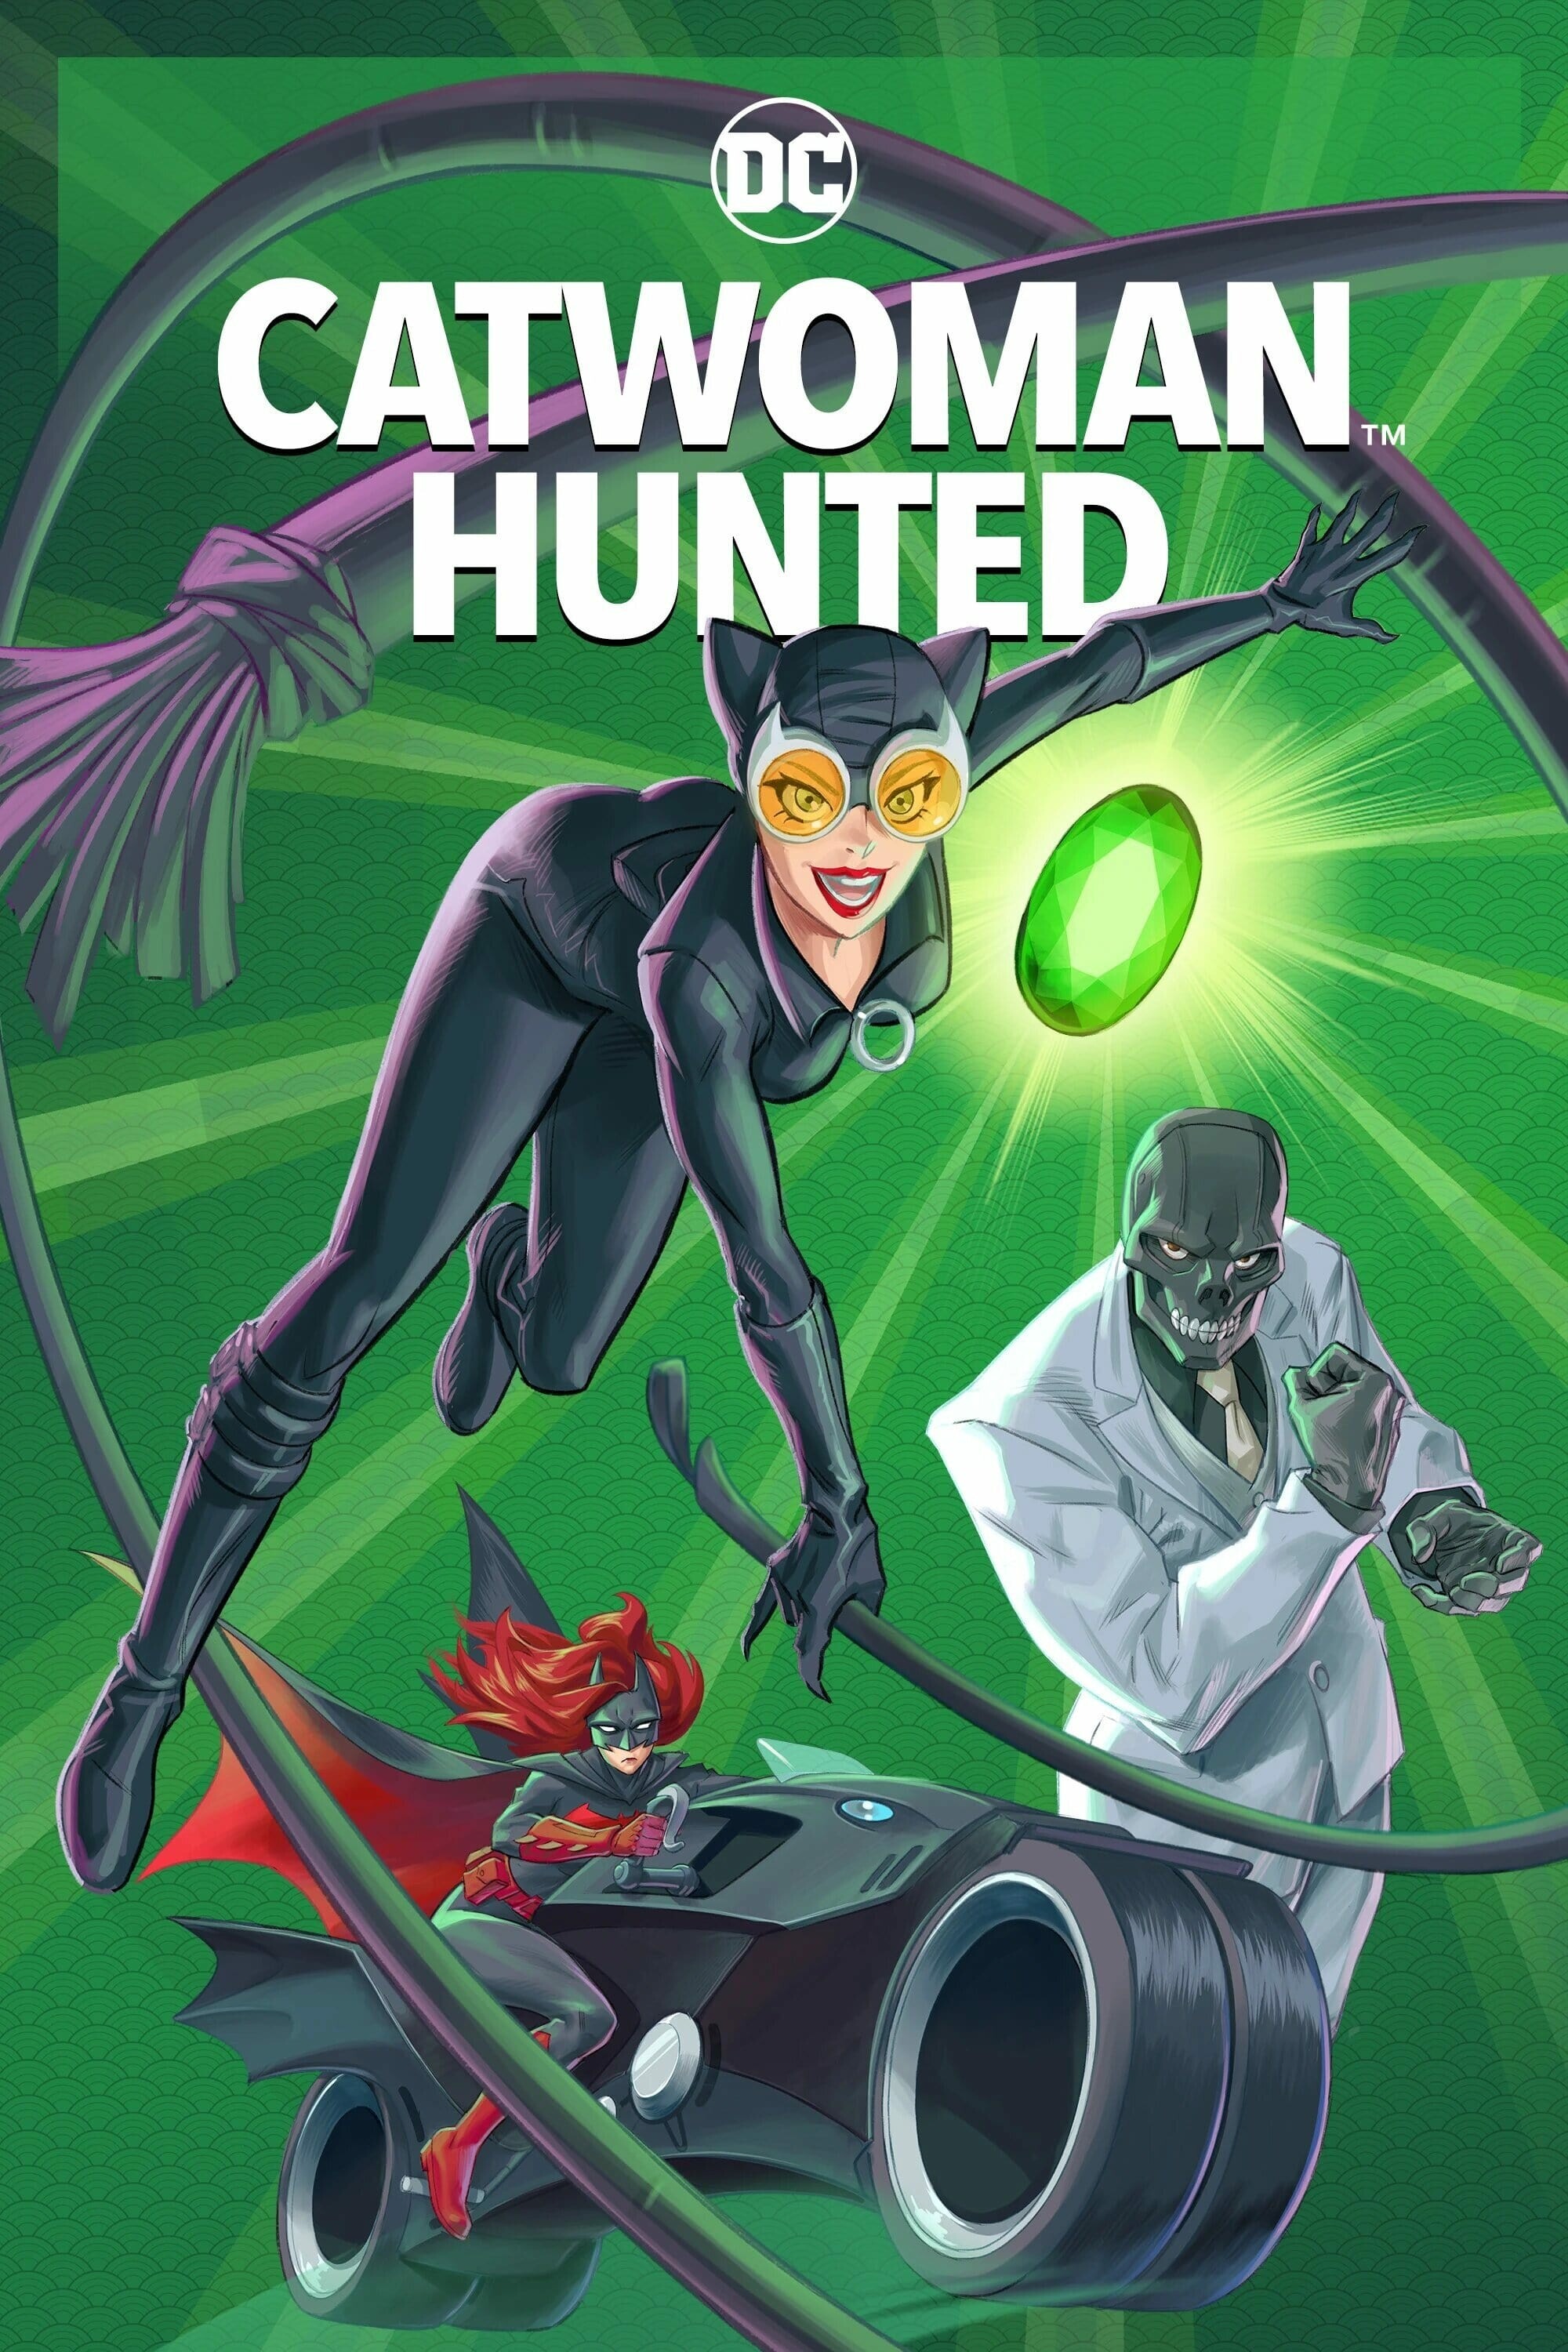 Catwoman Hunted 2022 BluRay 1080p DTS x264-MTeam